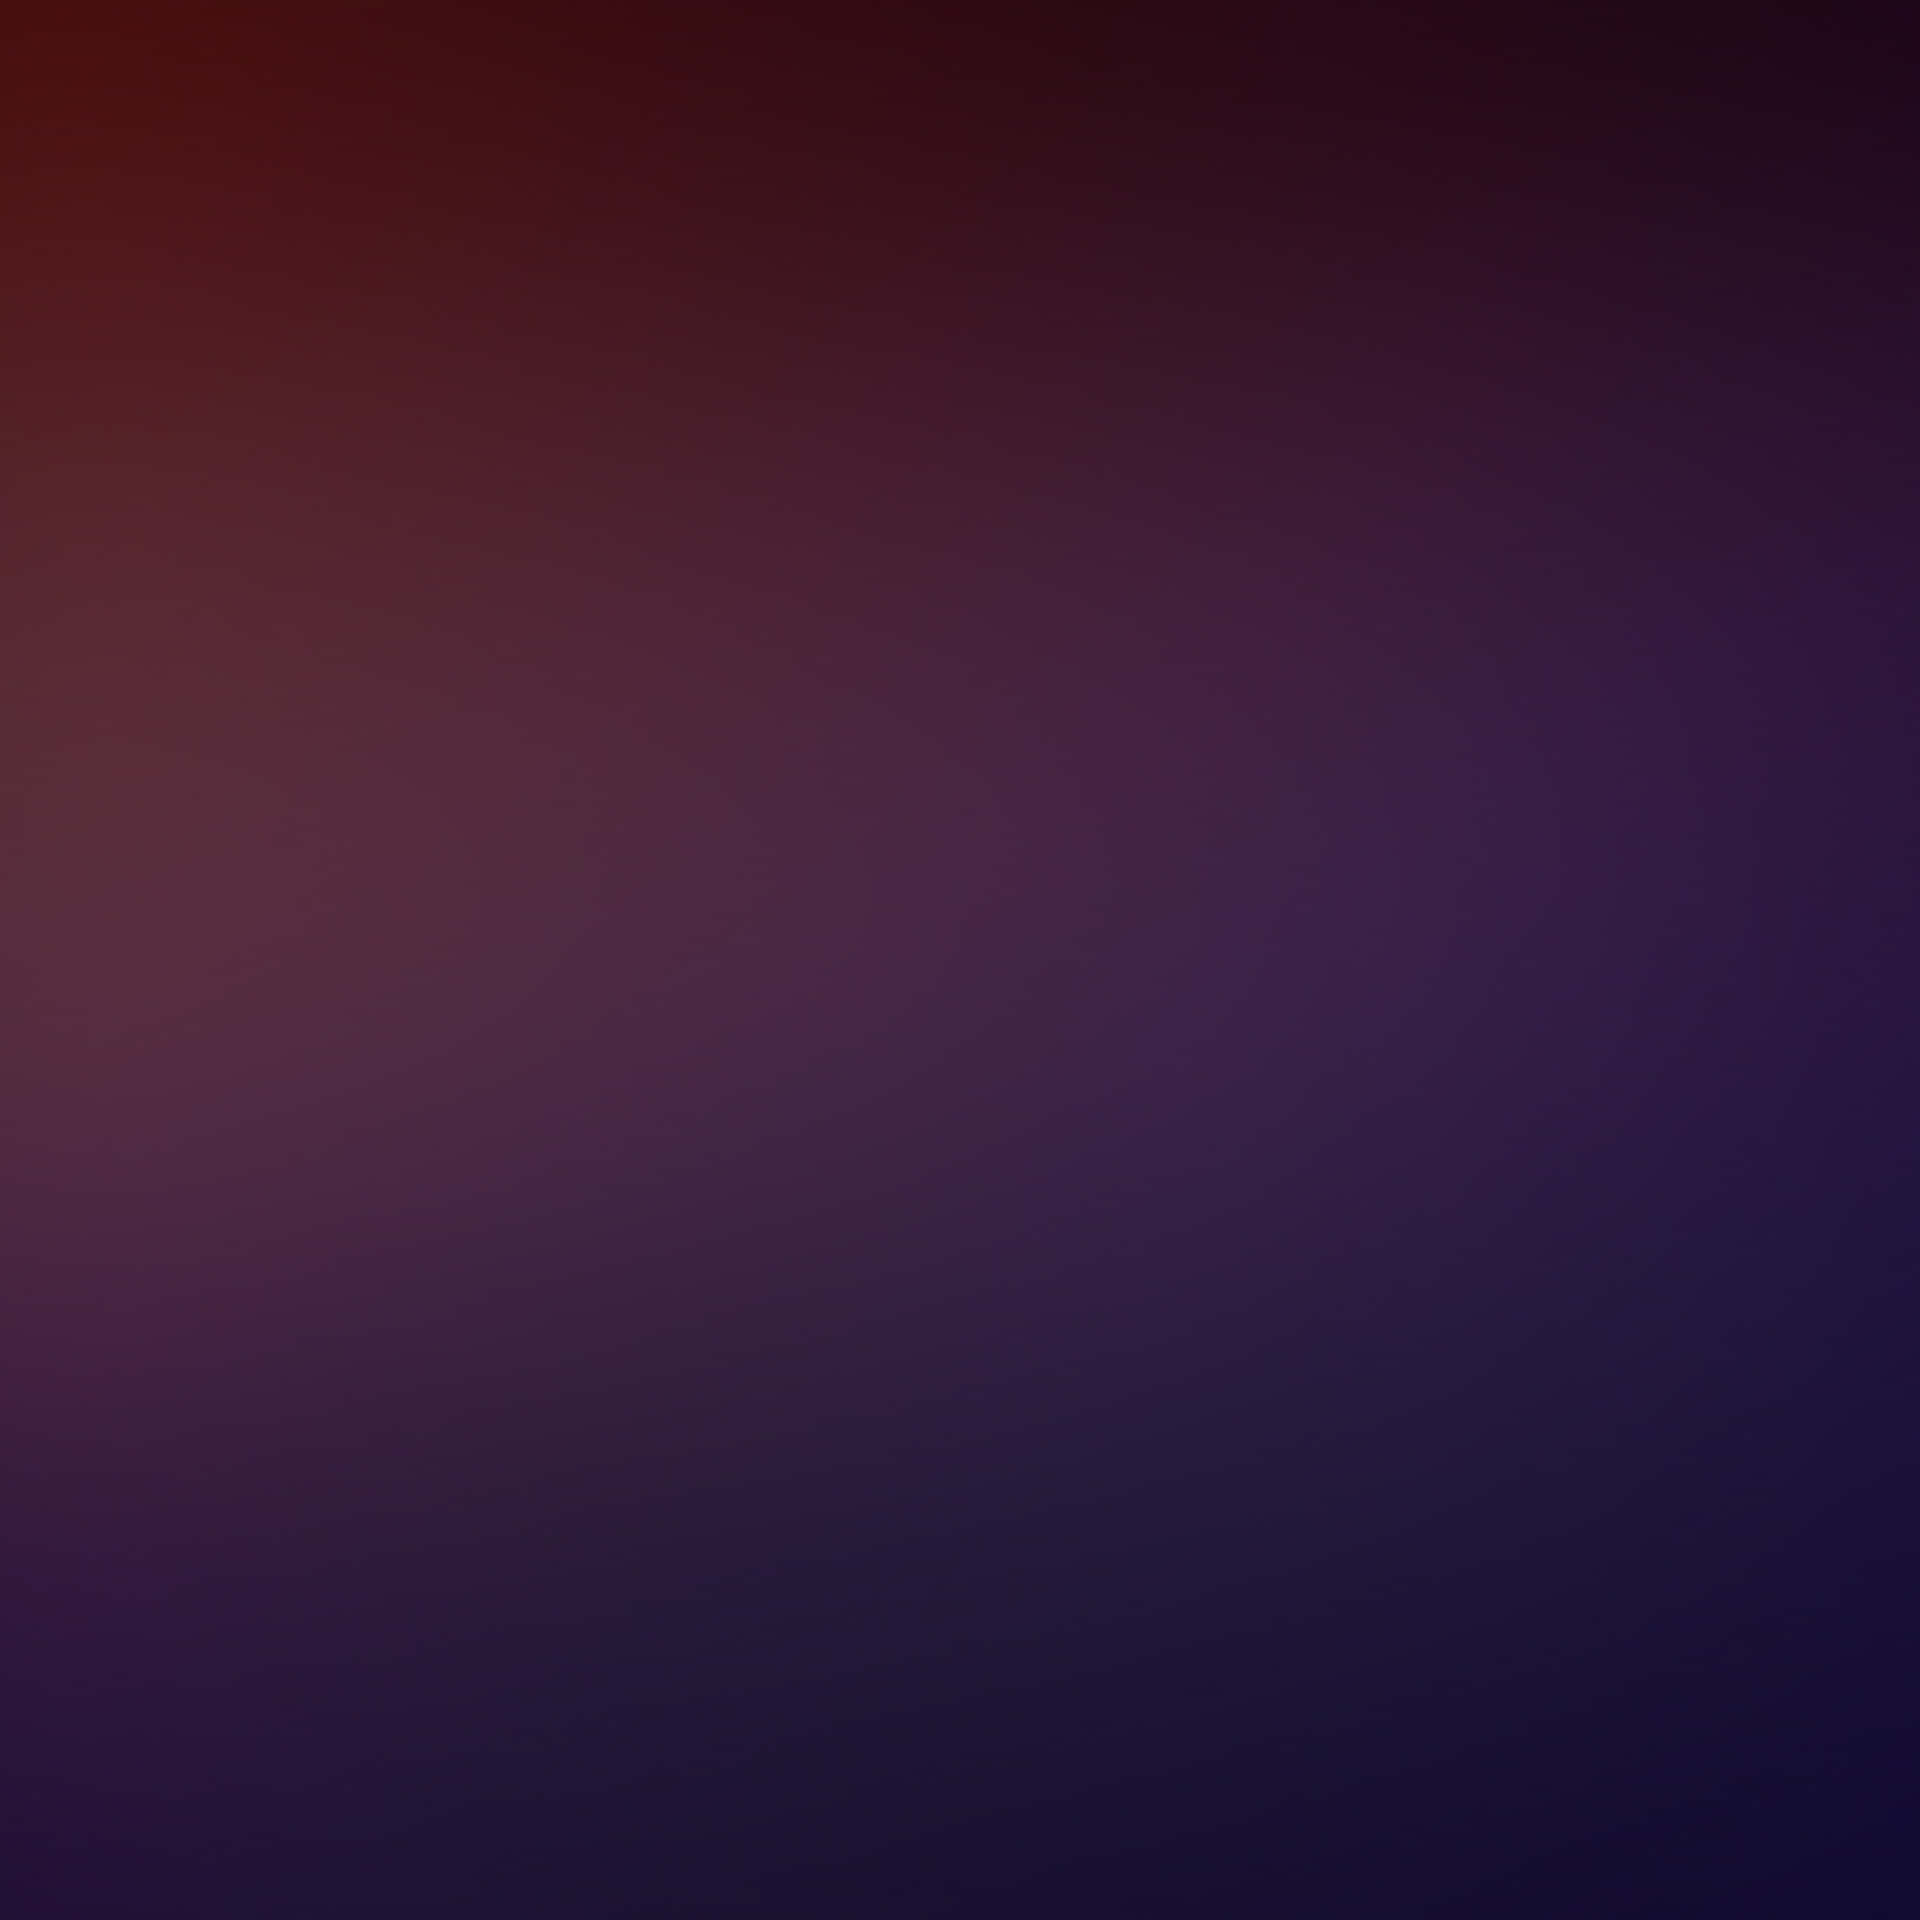 A Purple And Red Background With A Light Blue Sky Wallpaper